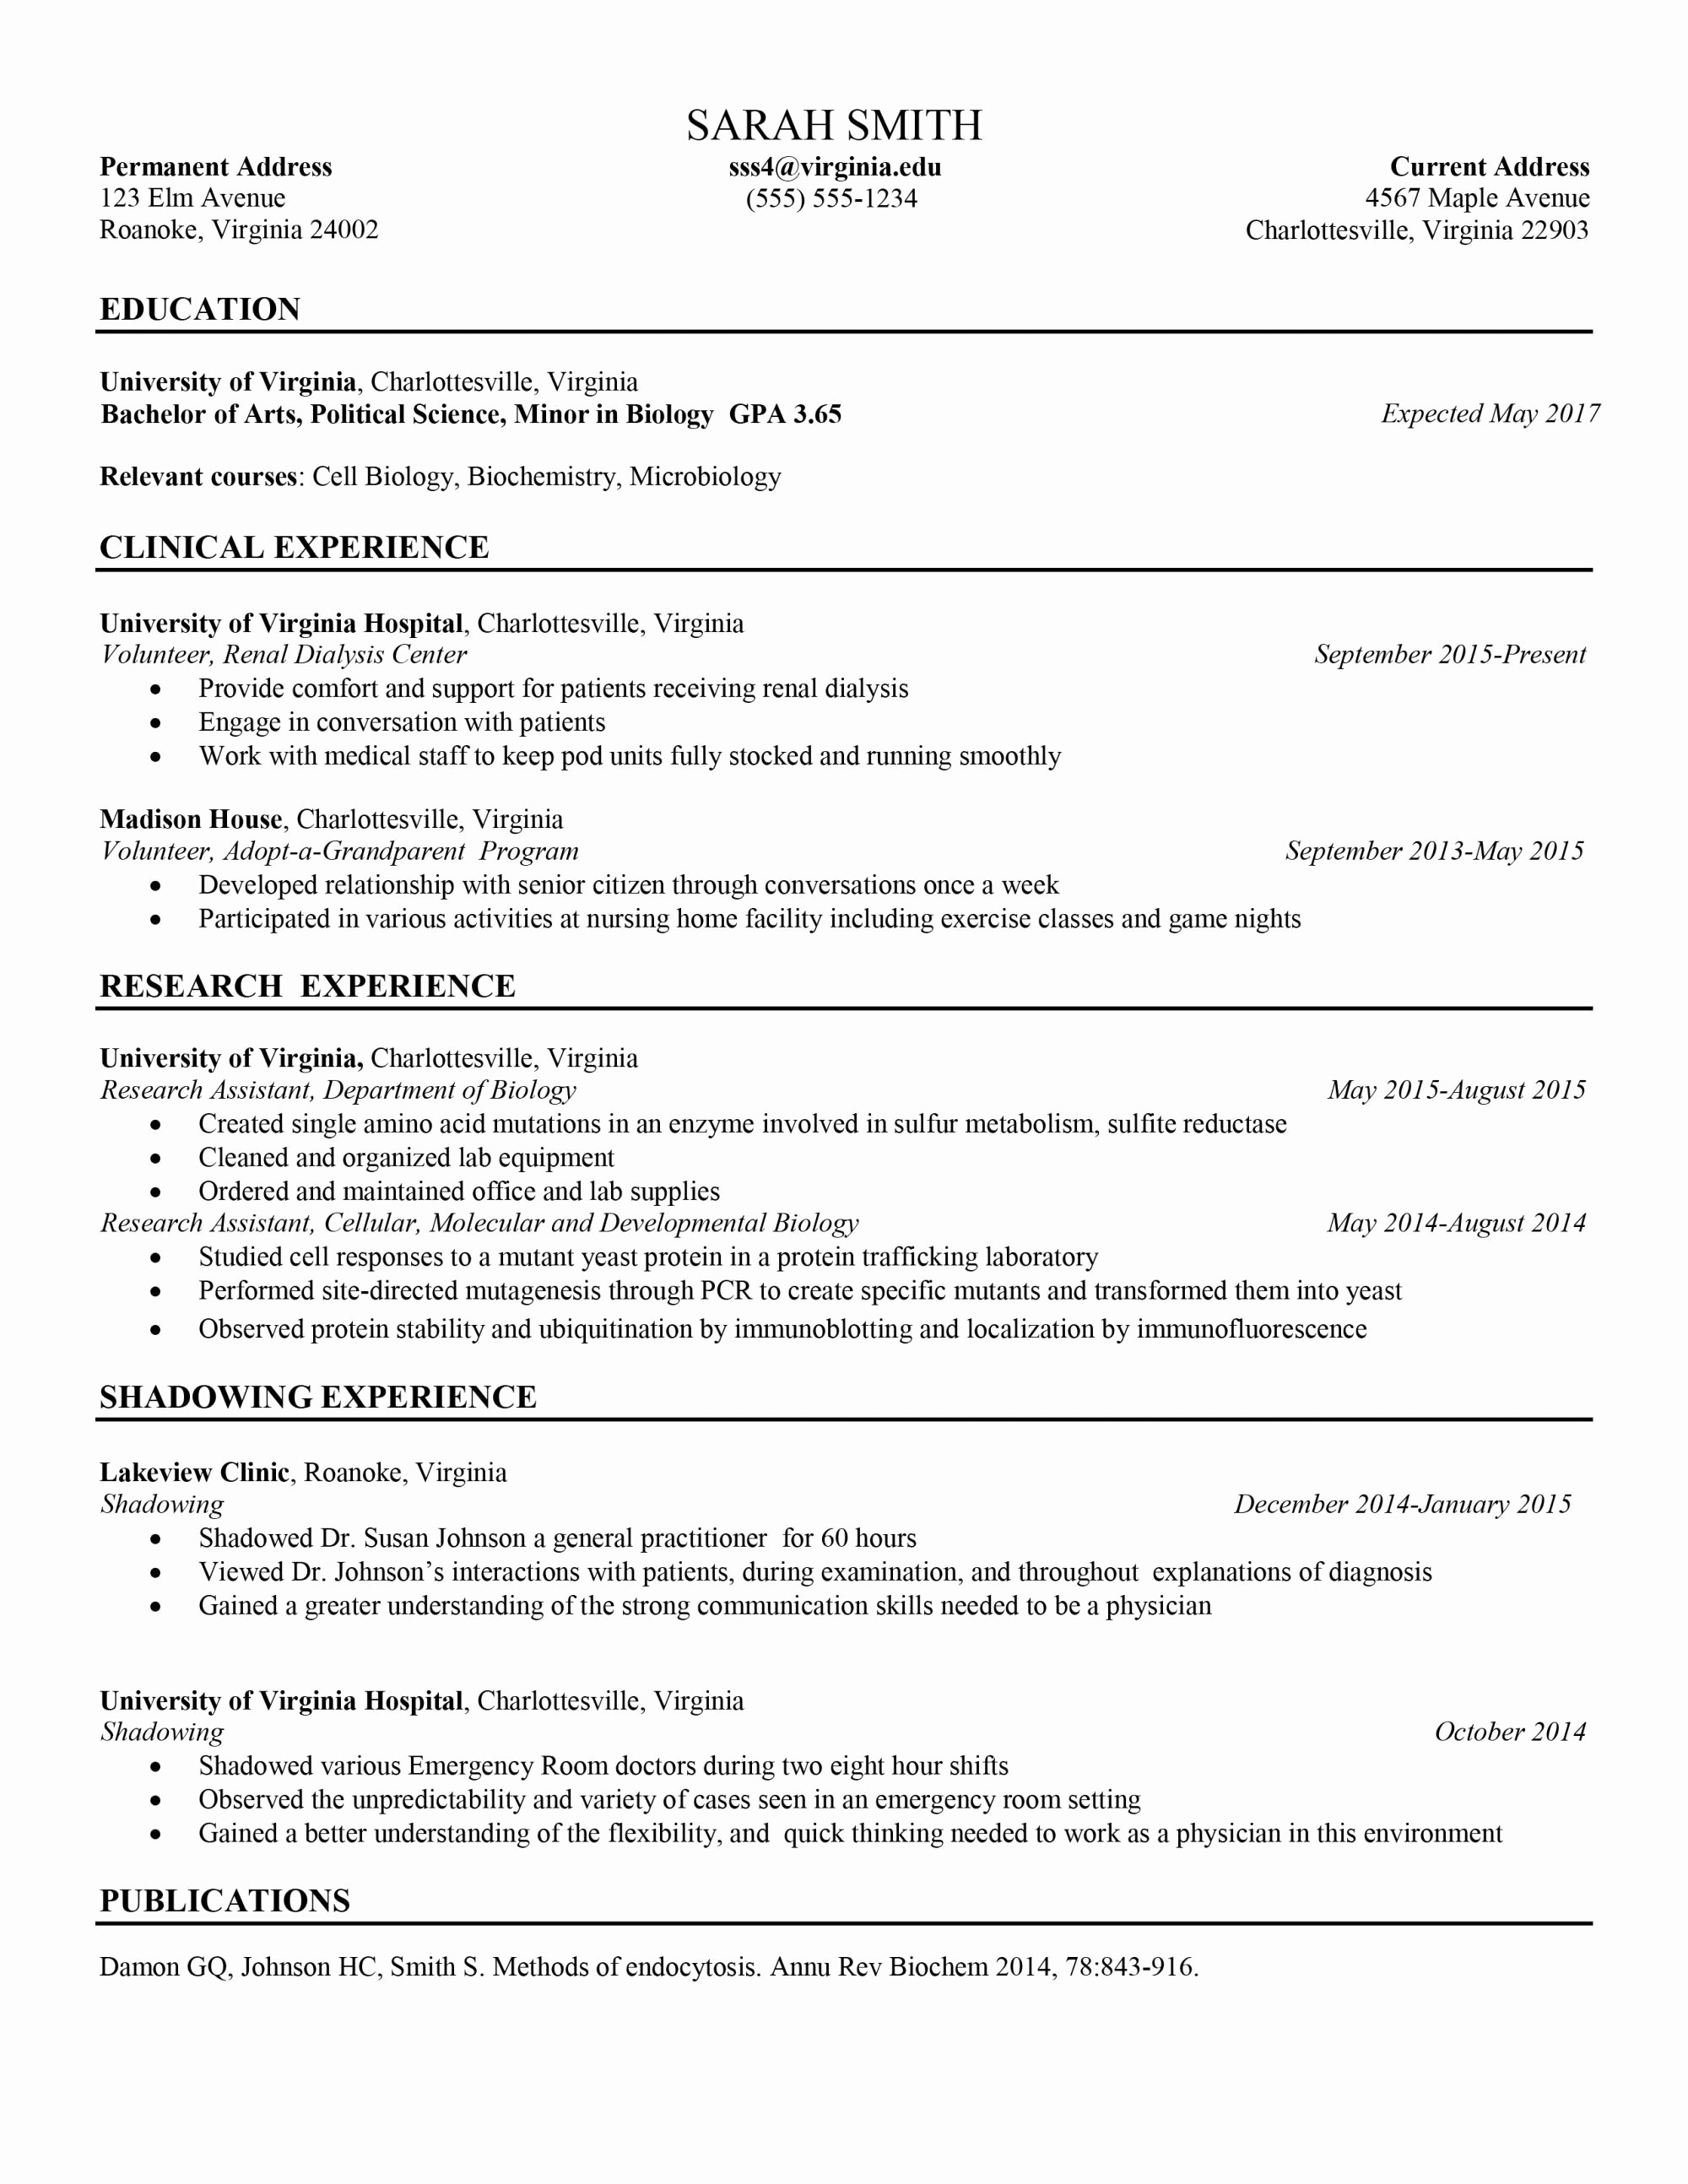 Generic Cover Letter Template - Fire Fighter Resume Unique Editor Resume Sample 29 Od Specialist